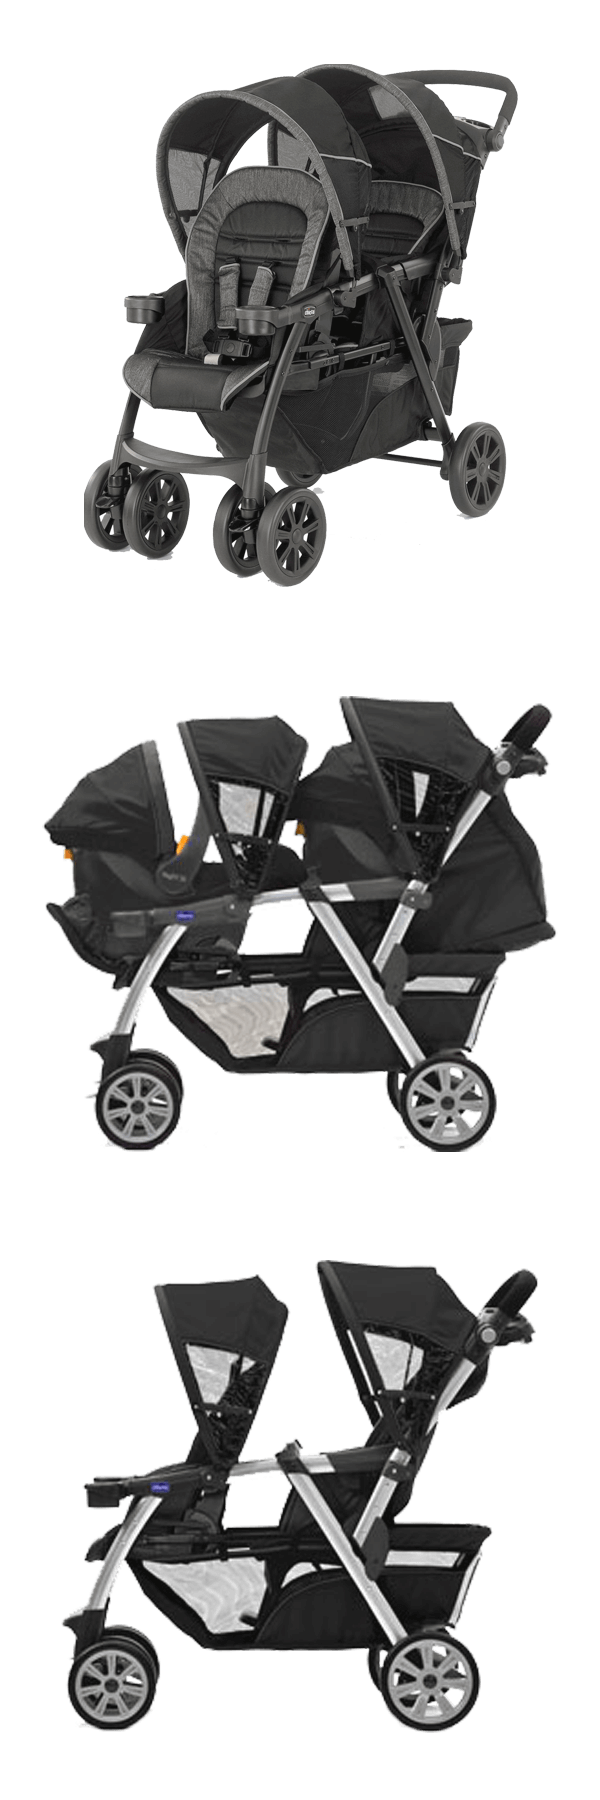 Cortina Together stroller configurations